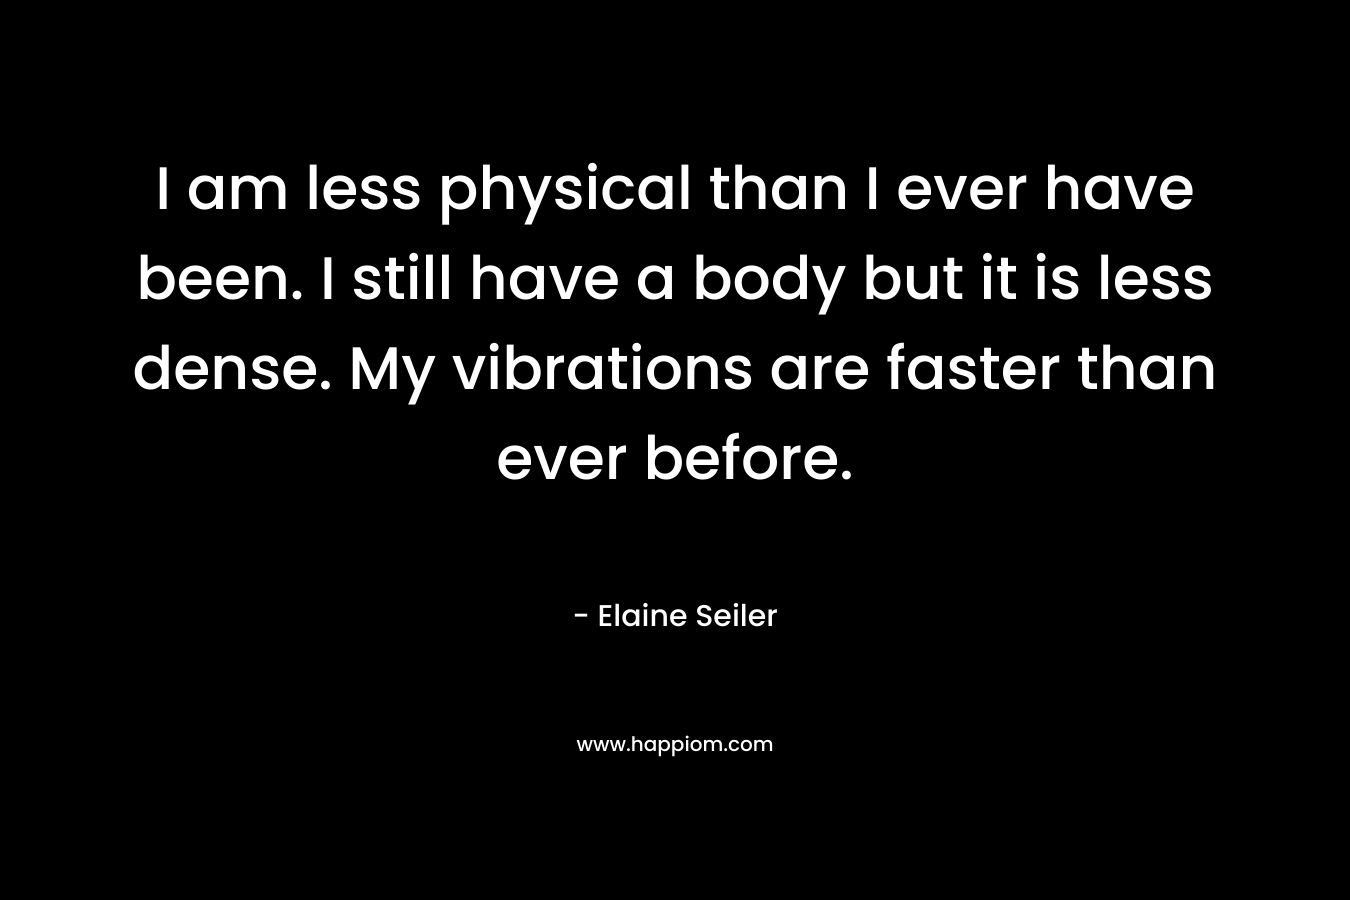 I am less physical than I ever have been. I still have a body but it is less dense. My vibrations are faster than ever before.